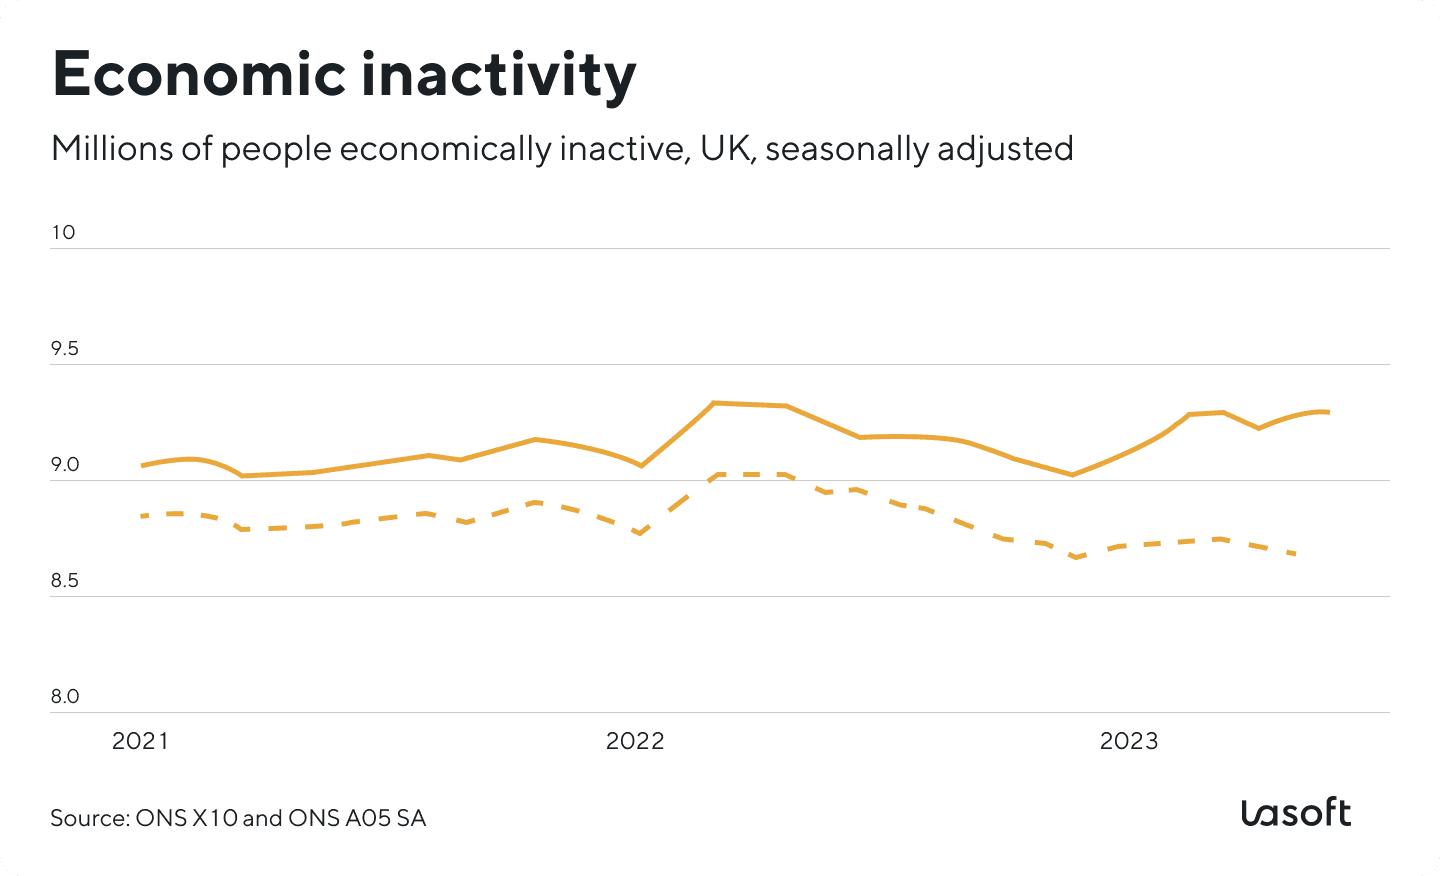 Report about the economically inactive population in the UK